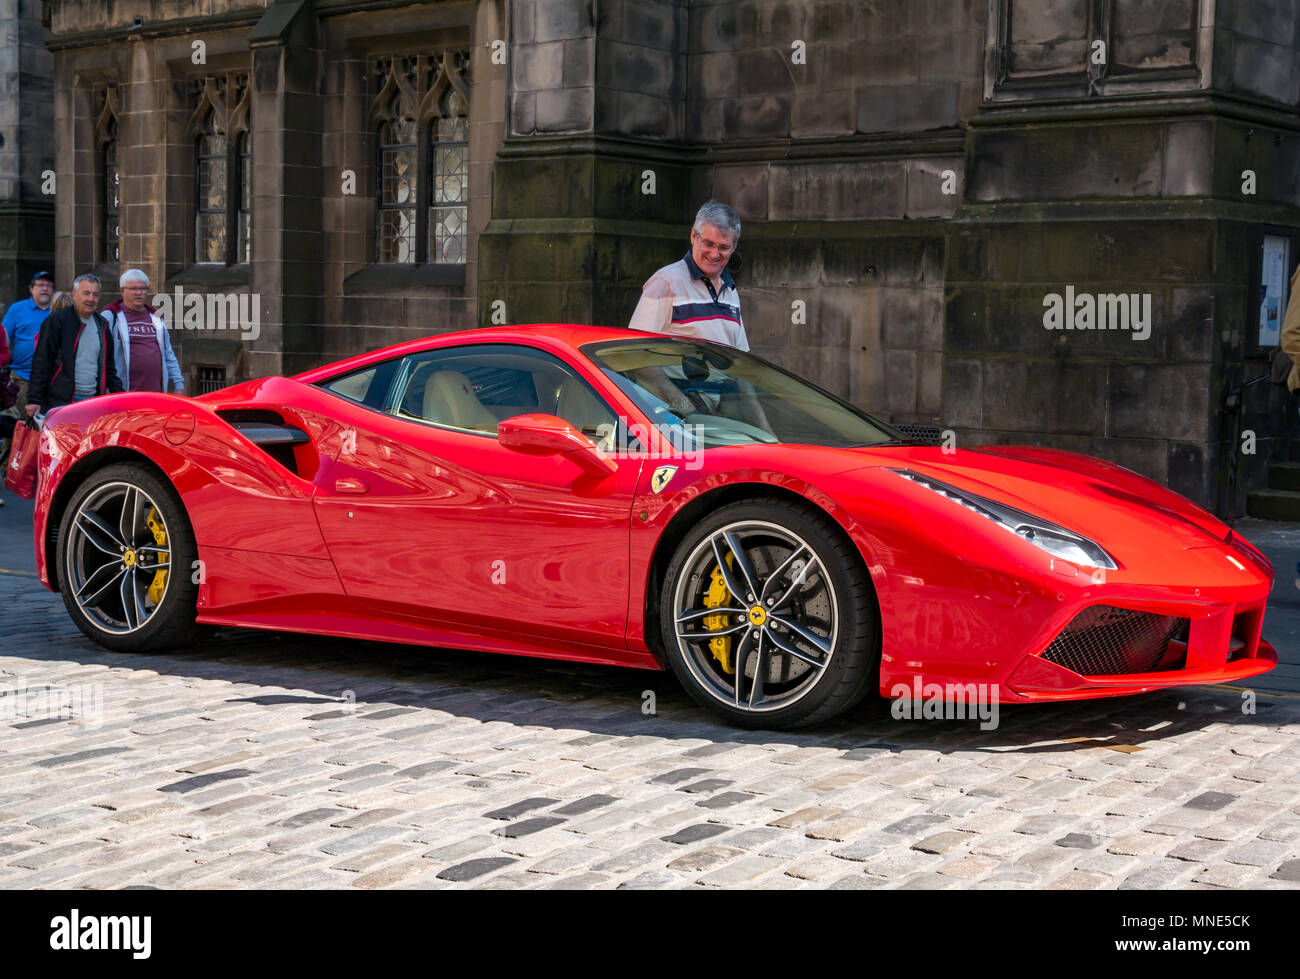 Royal Mile, Edinburgh, 16th May 2018. Tourists enjoying the sunshine on the Royal Mile, Edinburgh, Scotland, United Kingdom. A man walks by a bright red Ferrari 488 GTB coupe sports car parked on a double yellow line on the cobbled Royal Mile next to St Giles Cathedral, giving it an envious look Stock Photo